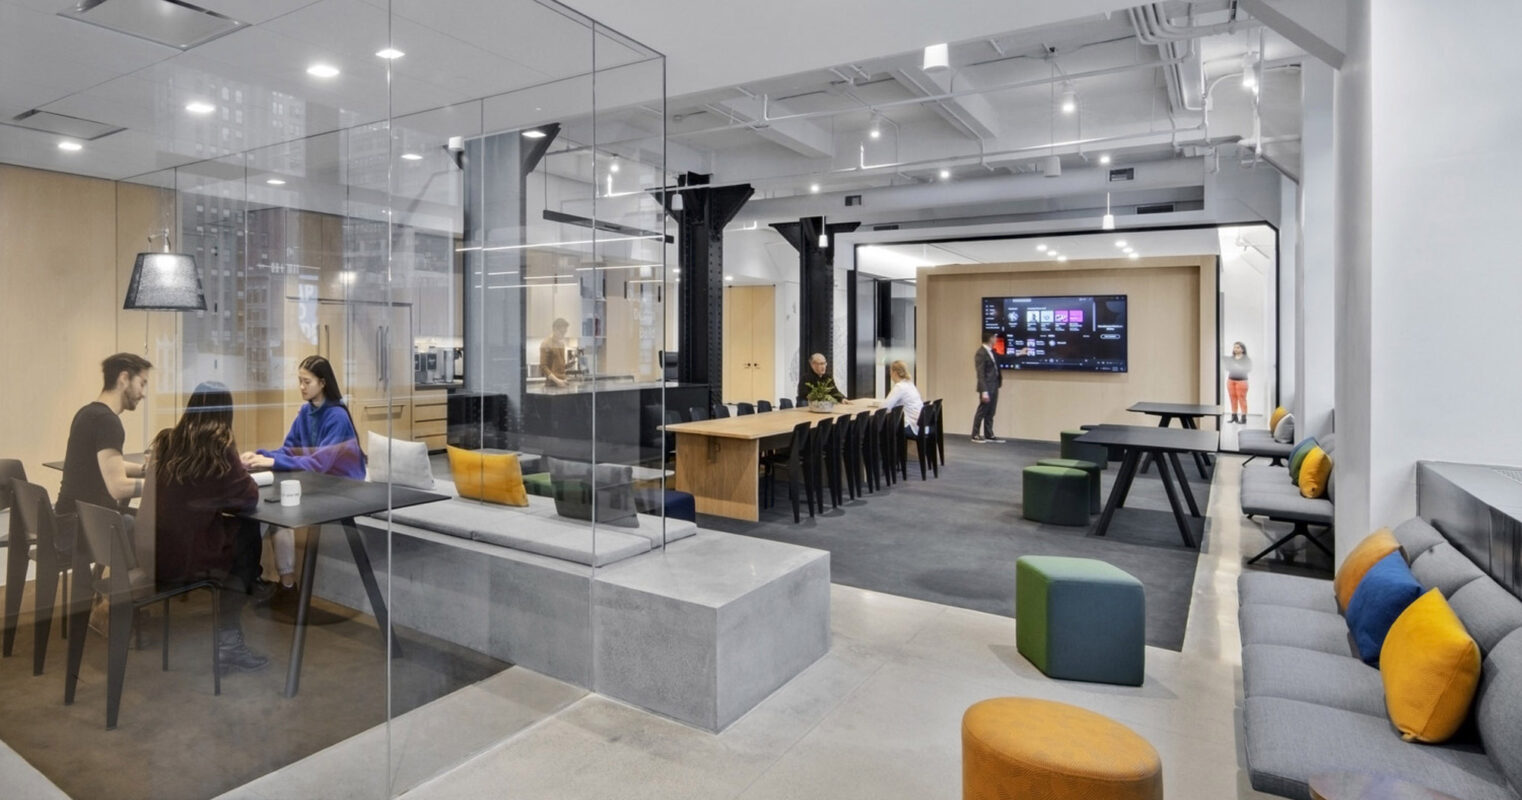 Modern office space showcasing a glass-walled meeting room, communal wooden worktable with pendant lighting, and casual lounge area with colorful, geometric furniture. Exposed ceiling and ductwork emphasize an industrial chic aesthetic contrasted with warm lighting for an inviting ambiance.